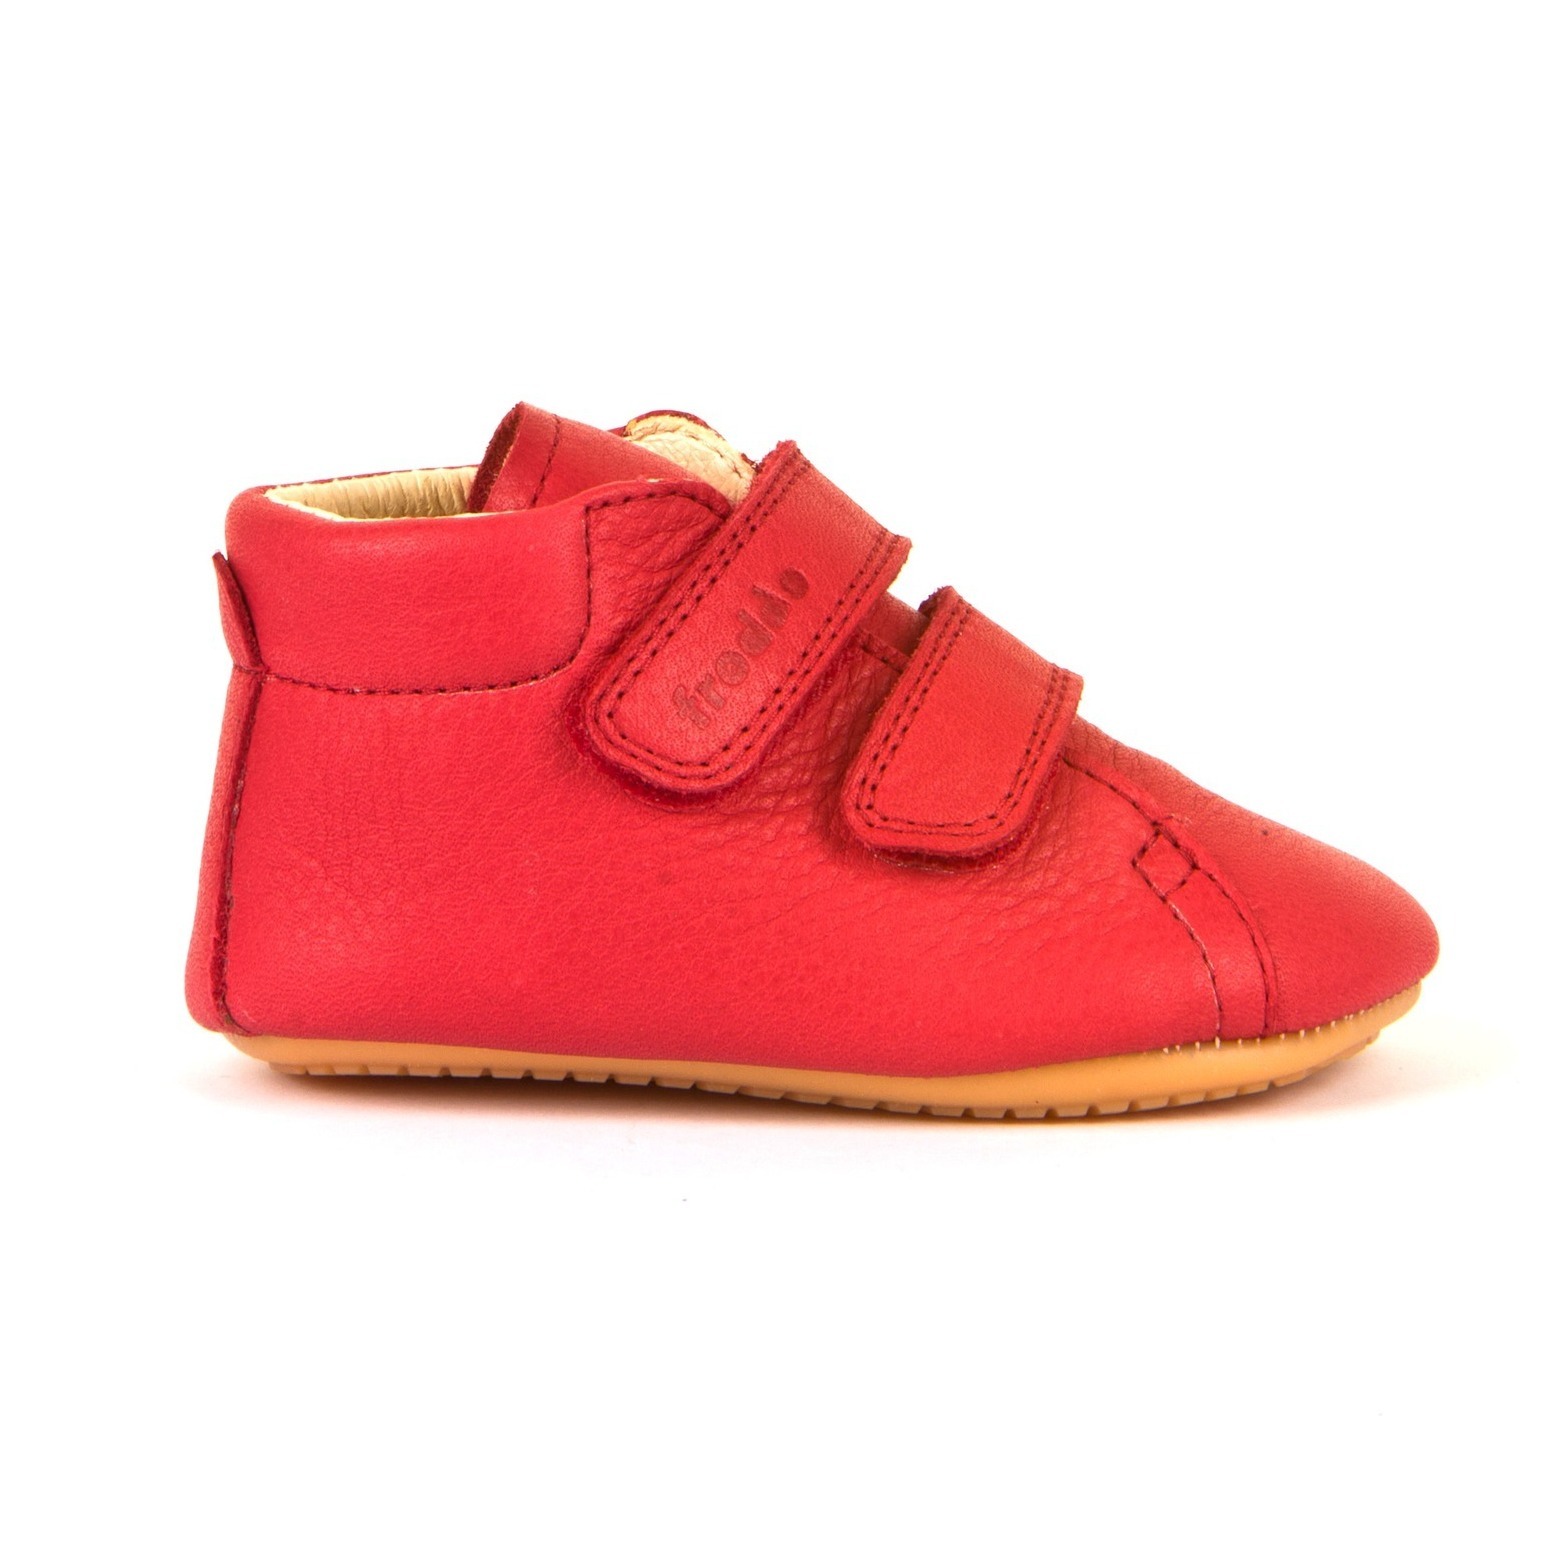 Chaussures Froddo Prewalkers double scratch - rouge - G1130013-6L